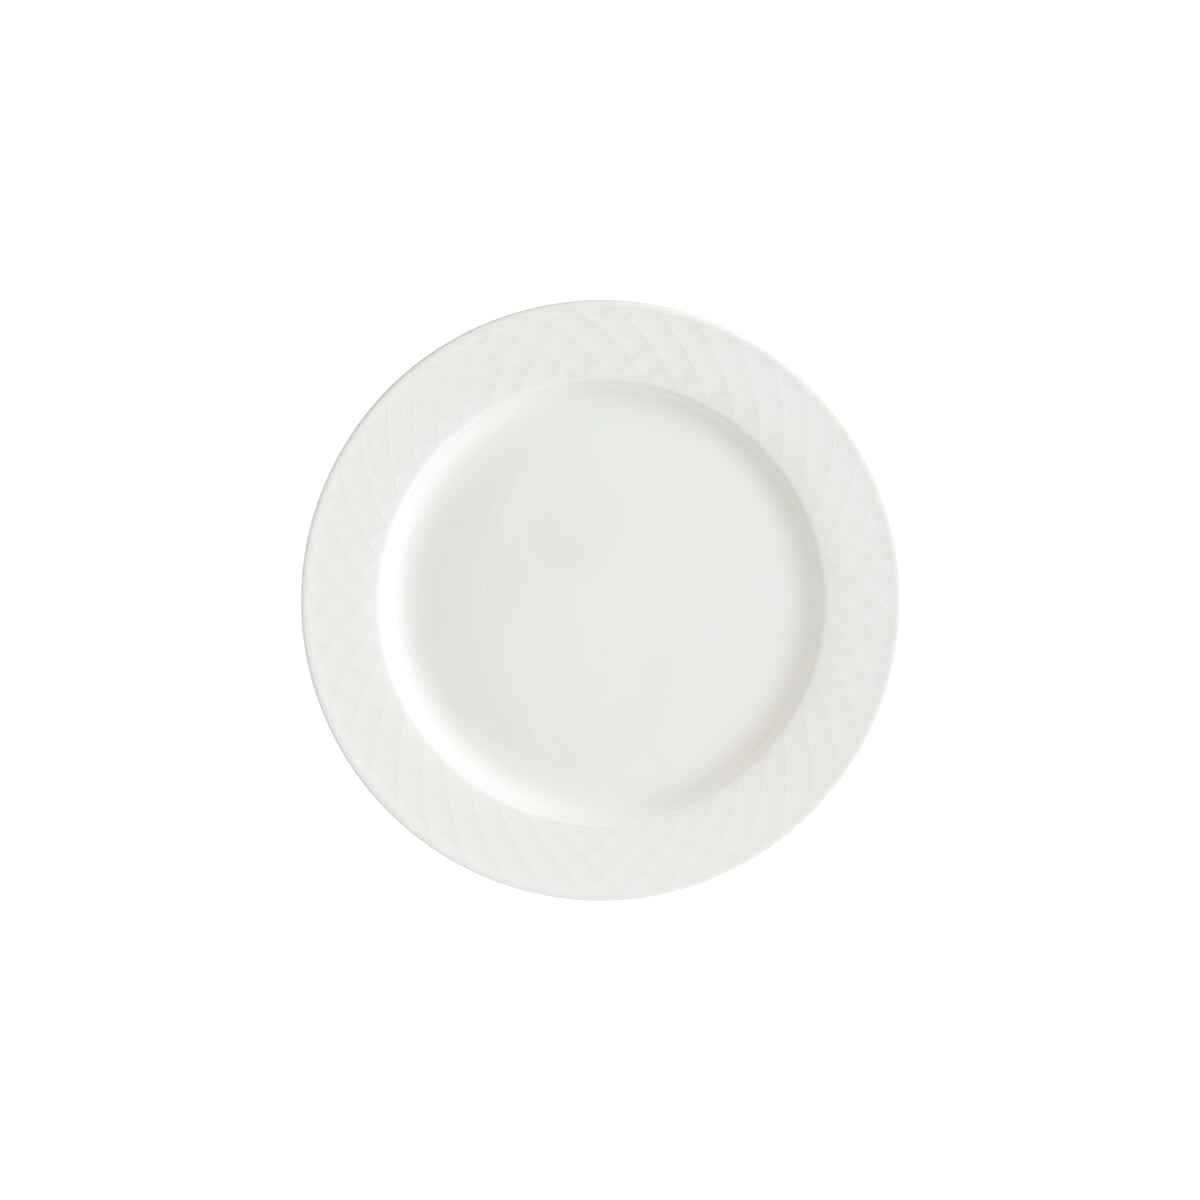 VB16-2238-2600 Villeroy And Boch Villeroy And Boch Bella White Plate Wide Rim 290mm Tomkin Australia Hospitality Supplies